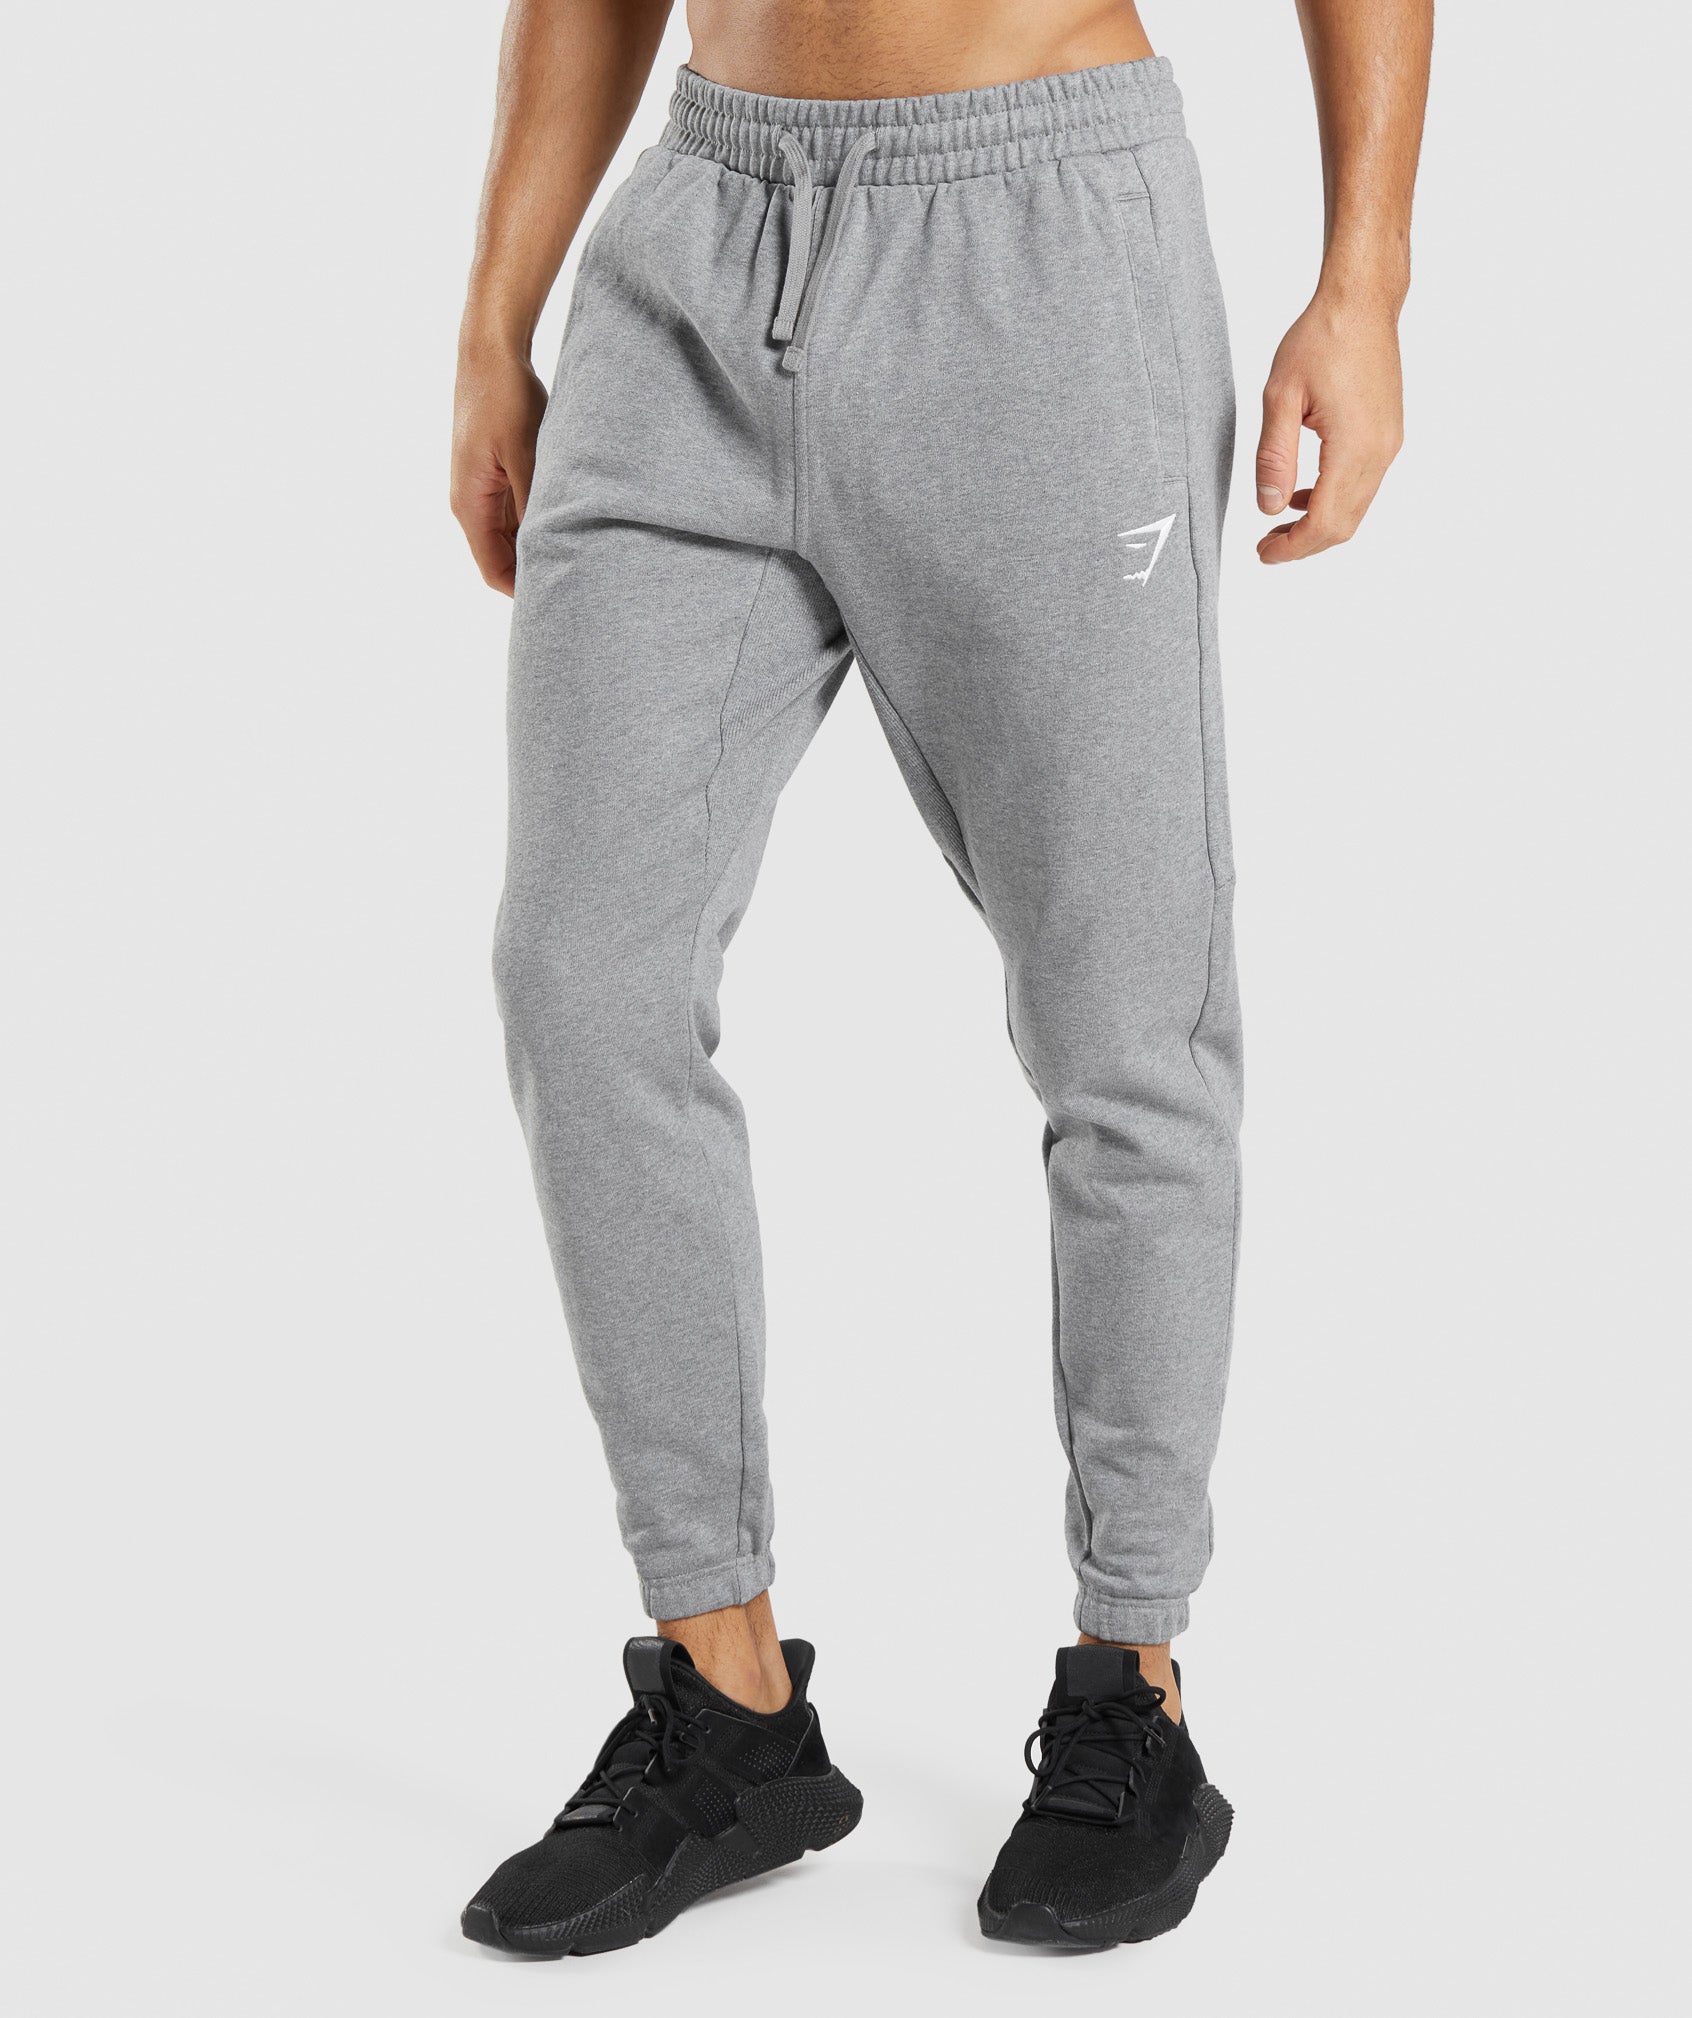 Gymshark, Pants, Nwt Gymshark Essential Oversized Joggers Gray Mark Mens  Size Small